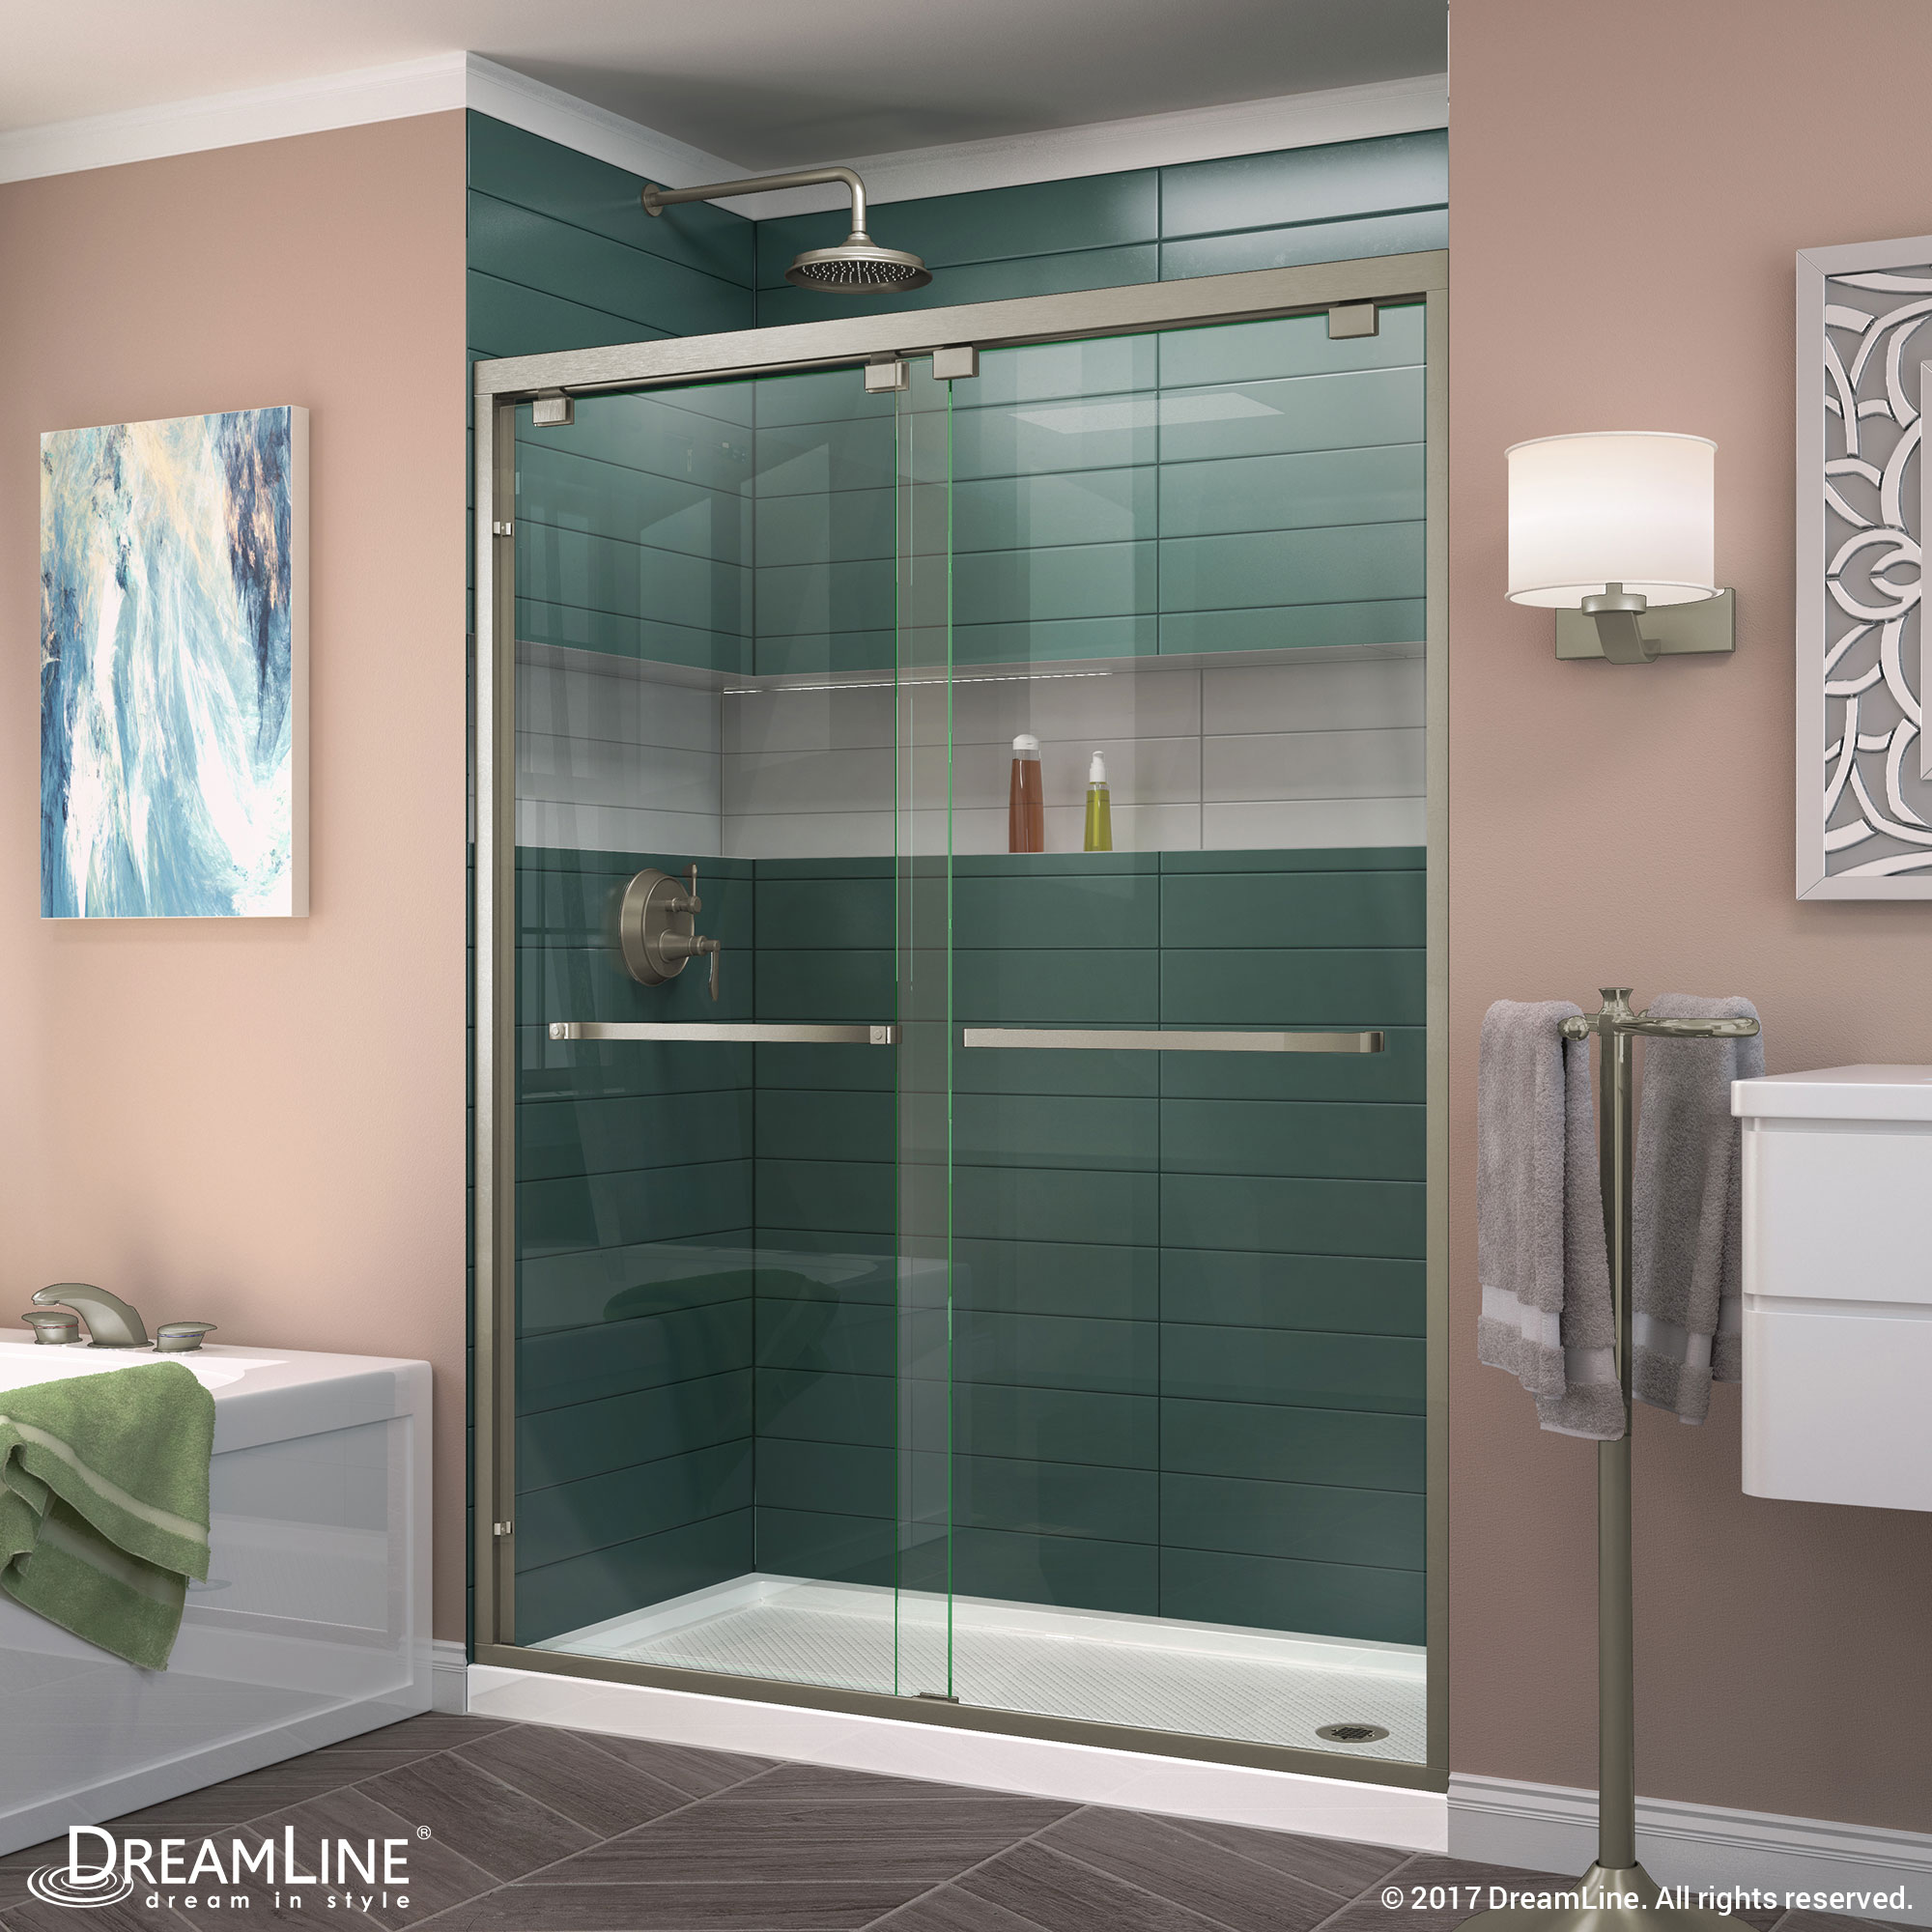 DreamLine Encore 30 in. D x 60 in. W x 78 3/4 in. H Bypass Shower Door in Chrome and Right Drain Black Base Kit